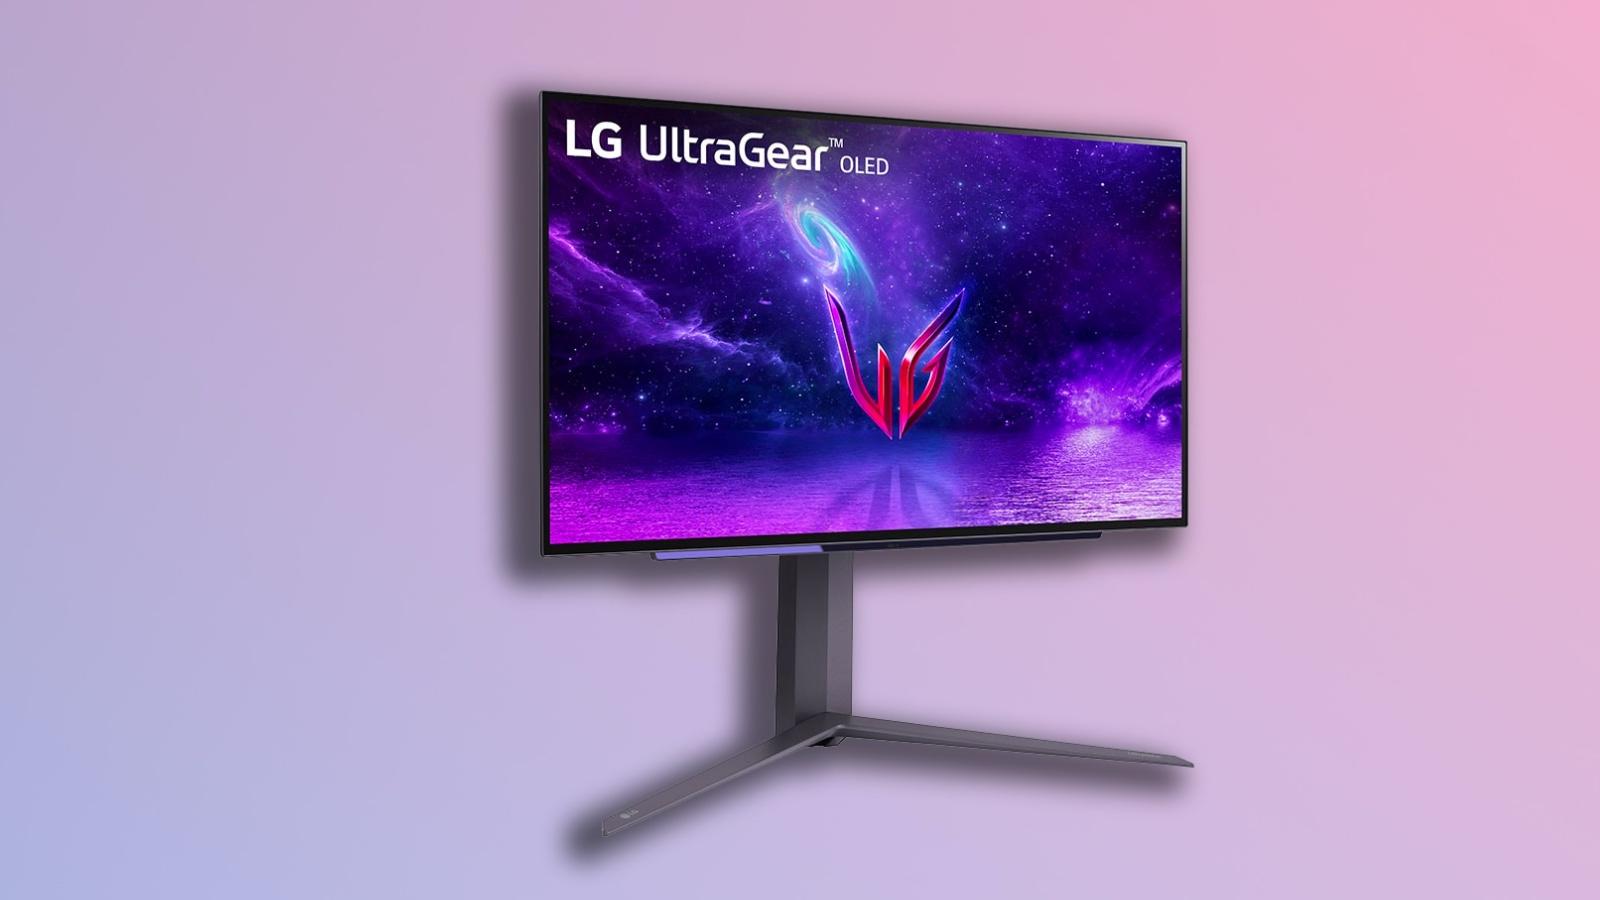 LG Unveils New UltraGear Gaming Monitors - Including First OLED Model